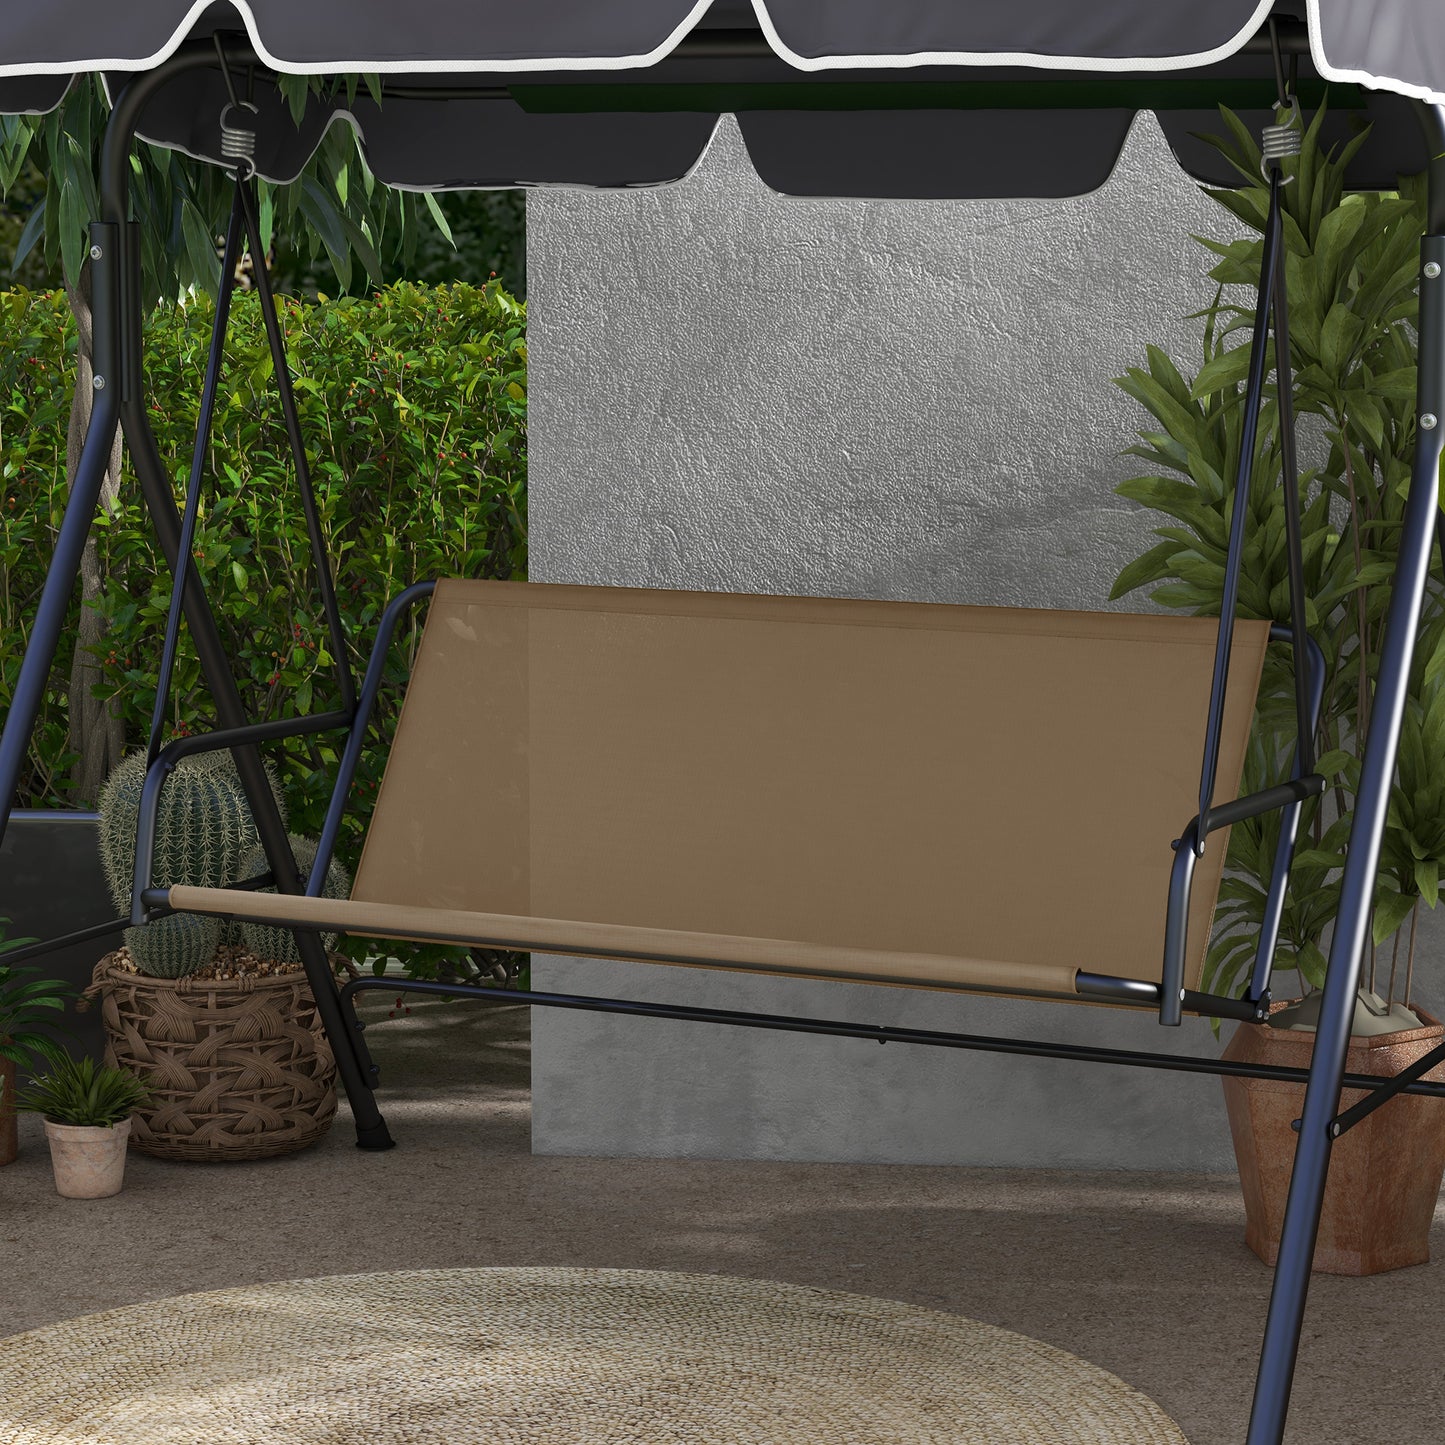 Outsunny Swing Seat Cover Replacement, for 2 and 3 Seater Bench, 115cm x 48cm x 48cm, Beige